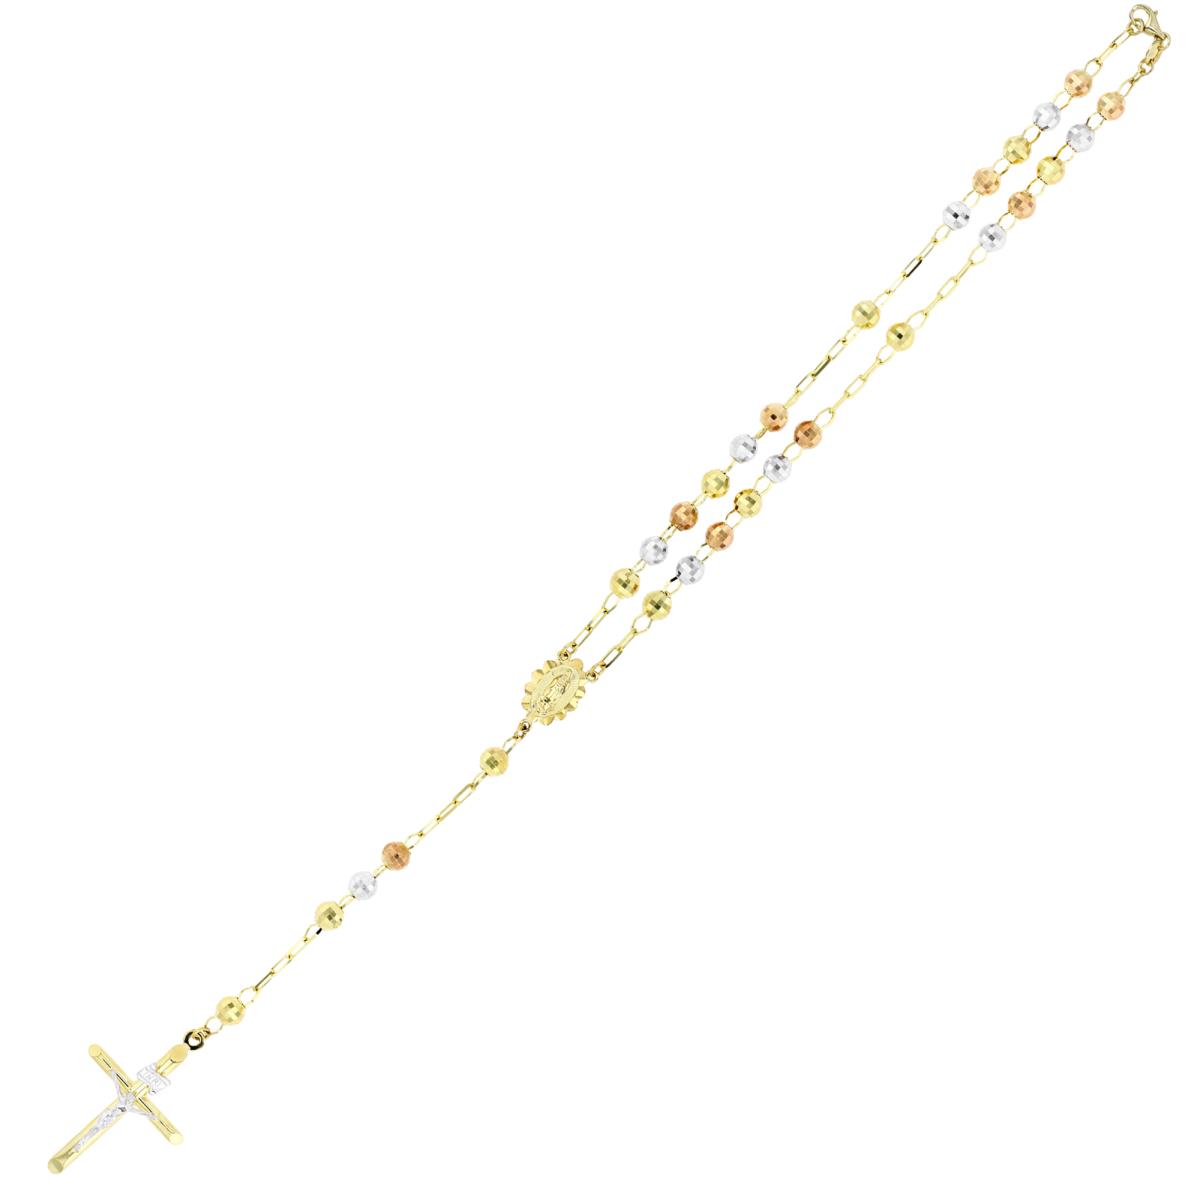 14K Gold Tricolor 6MM Diamond Cut Beads Rosary Necklace